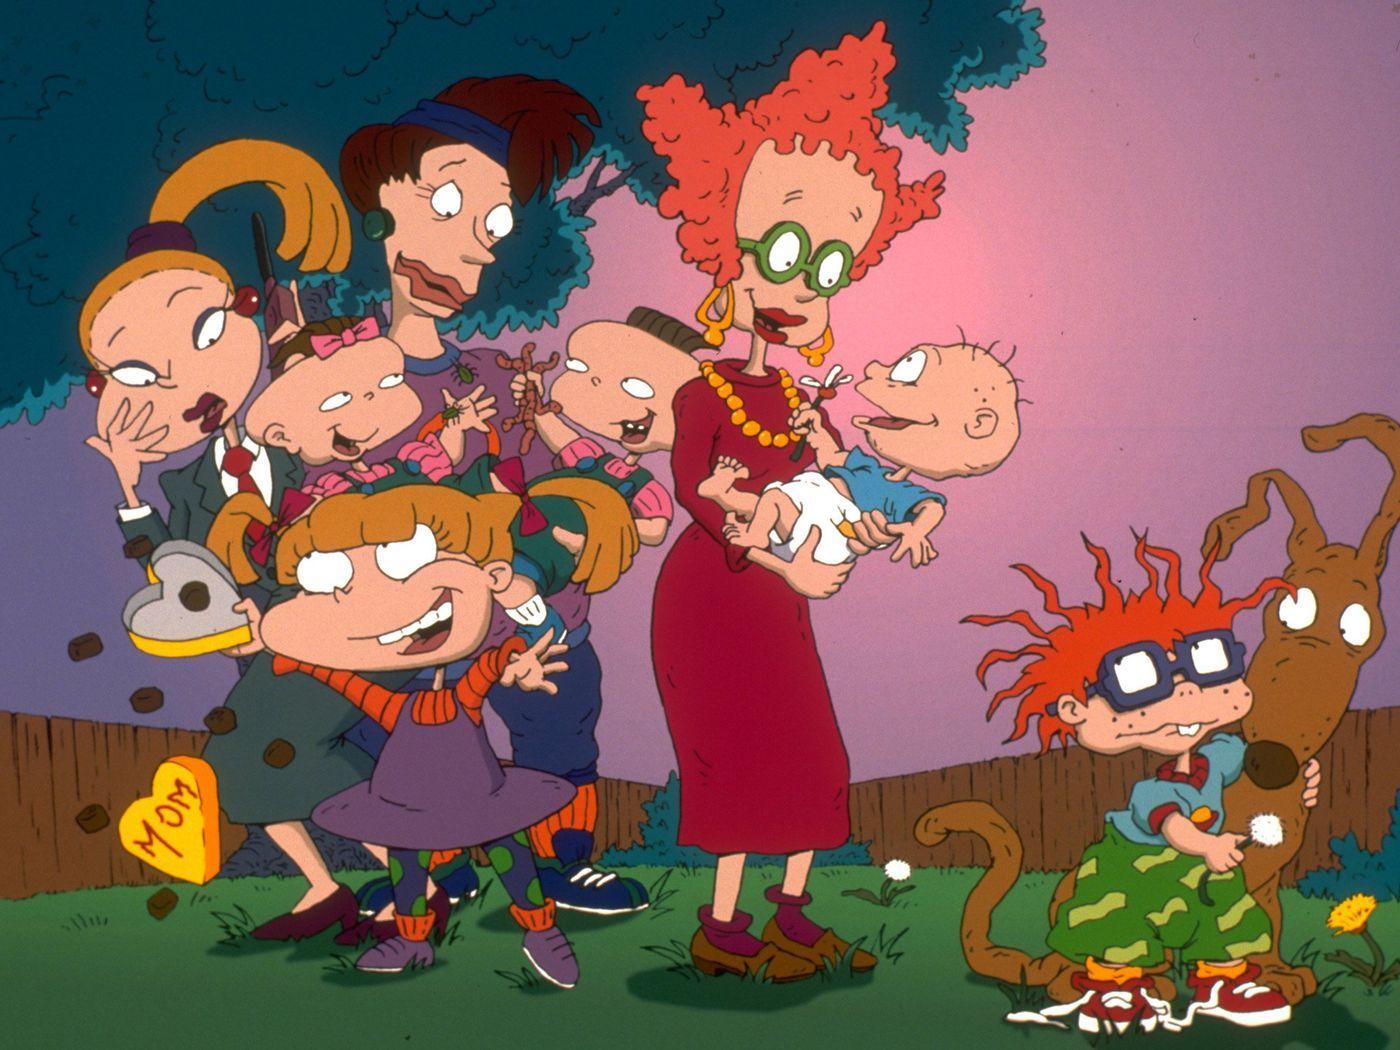 Nickelodeon revives Rugrats, orders live.